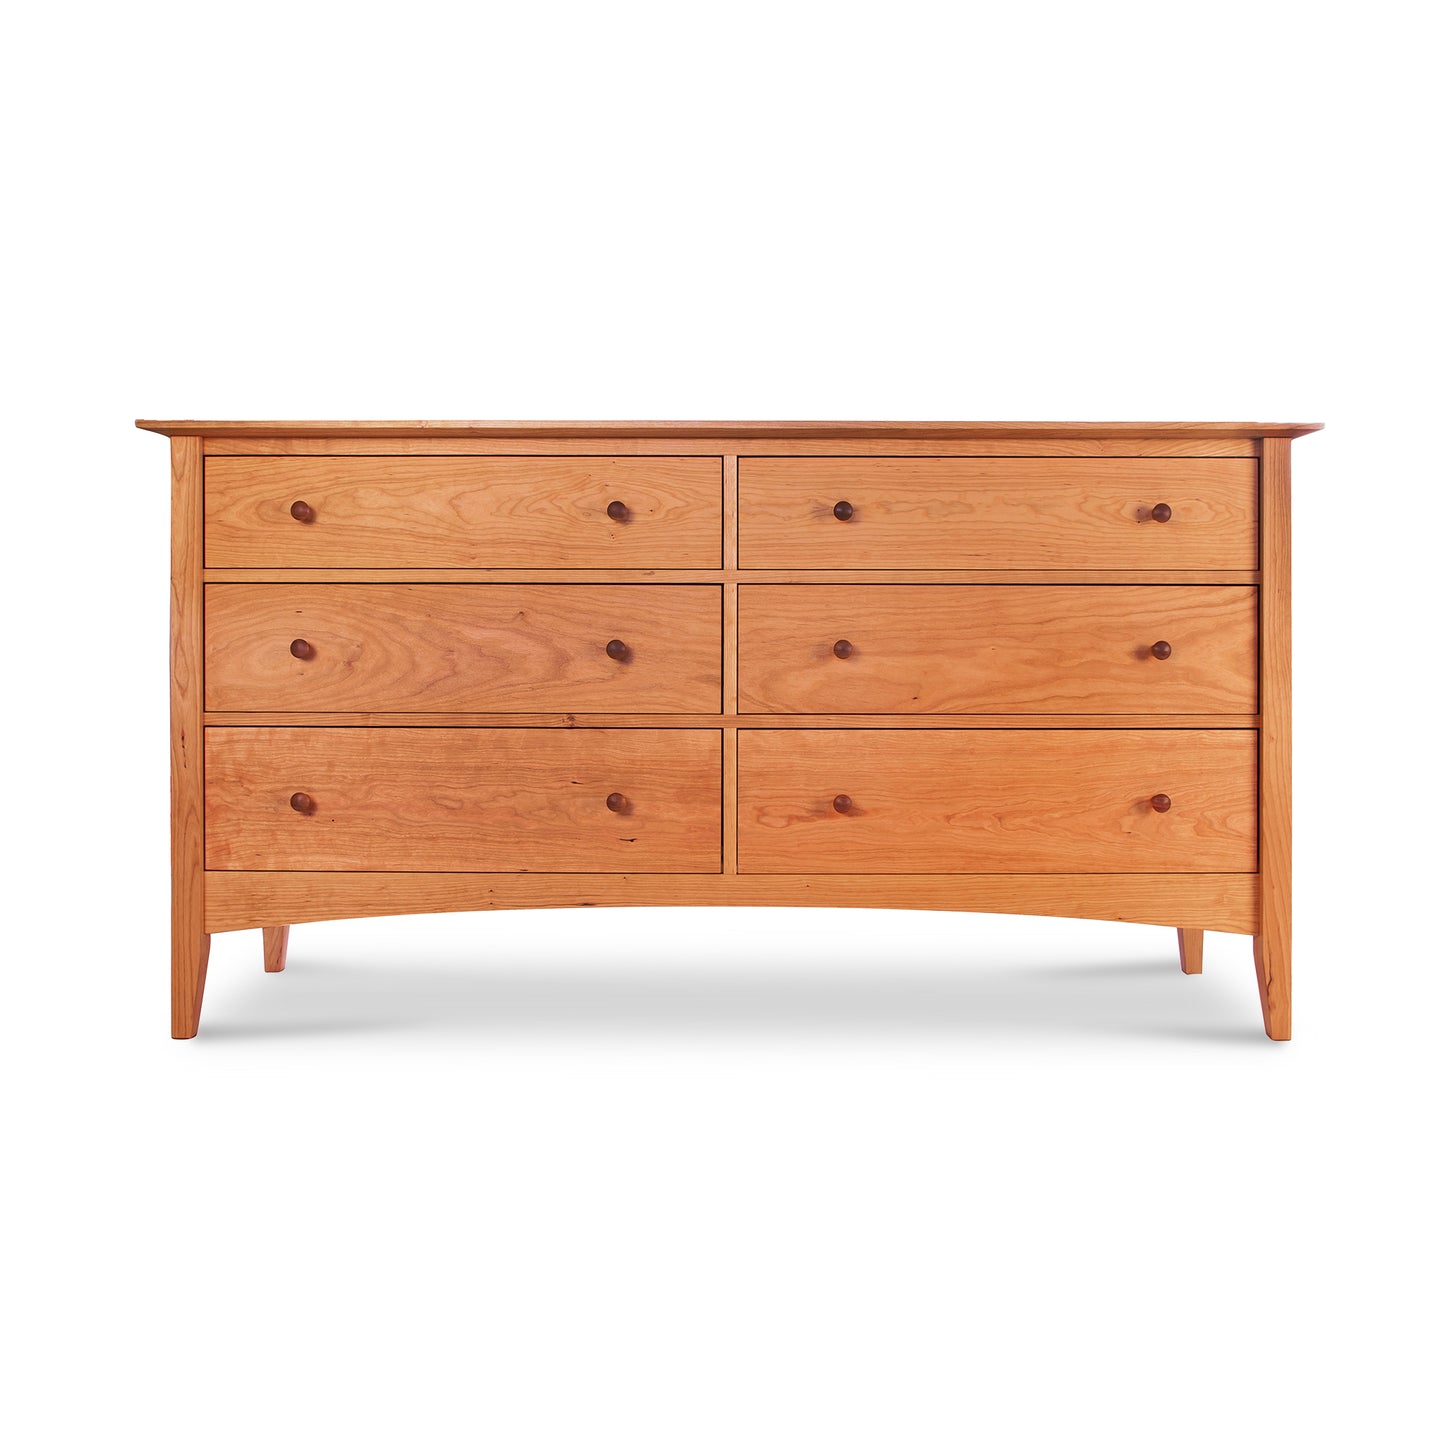 A Maple Corner Woodworks American Shaker 6-Drawer Dresser, featuring a simple traditional design with round knobs on each drawer, set against a plain white background.